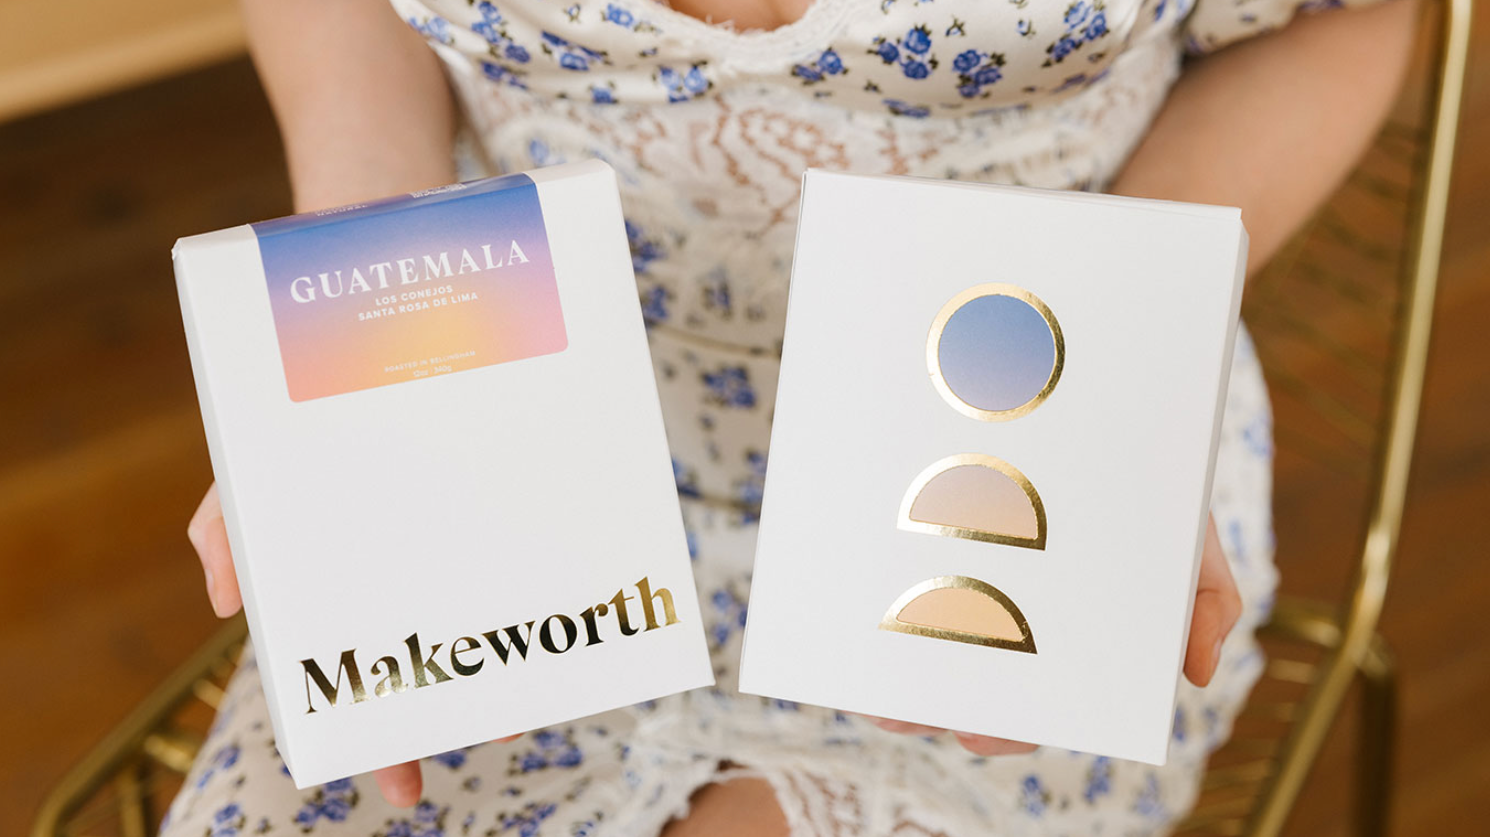 Makeworth Coffees beautifully designed retail packaging